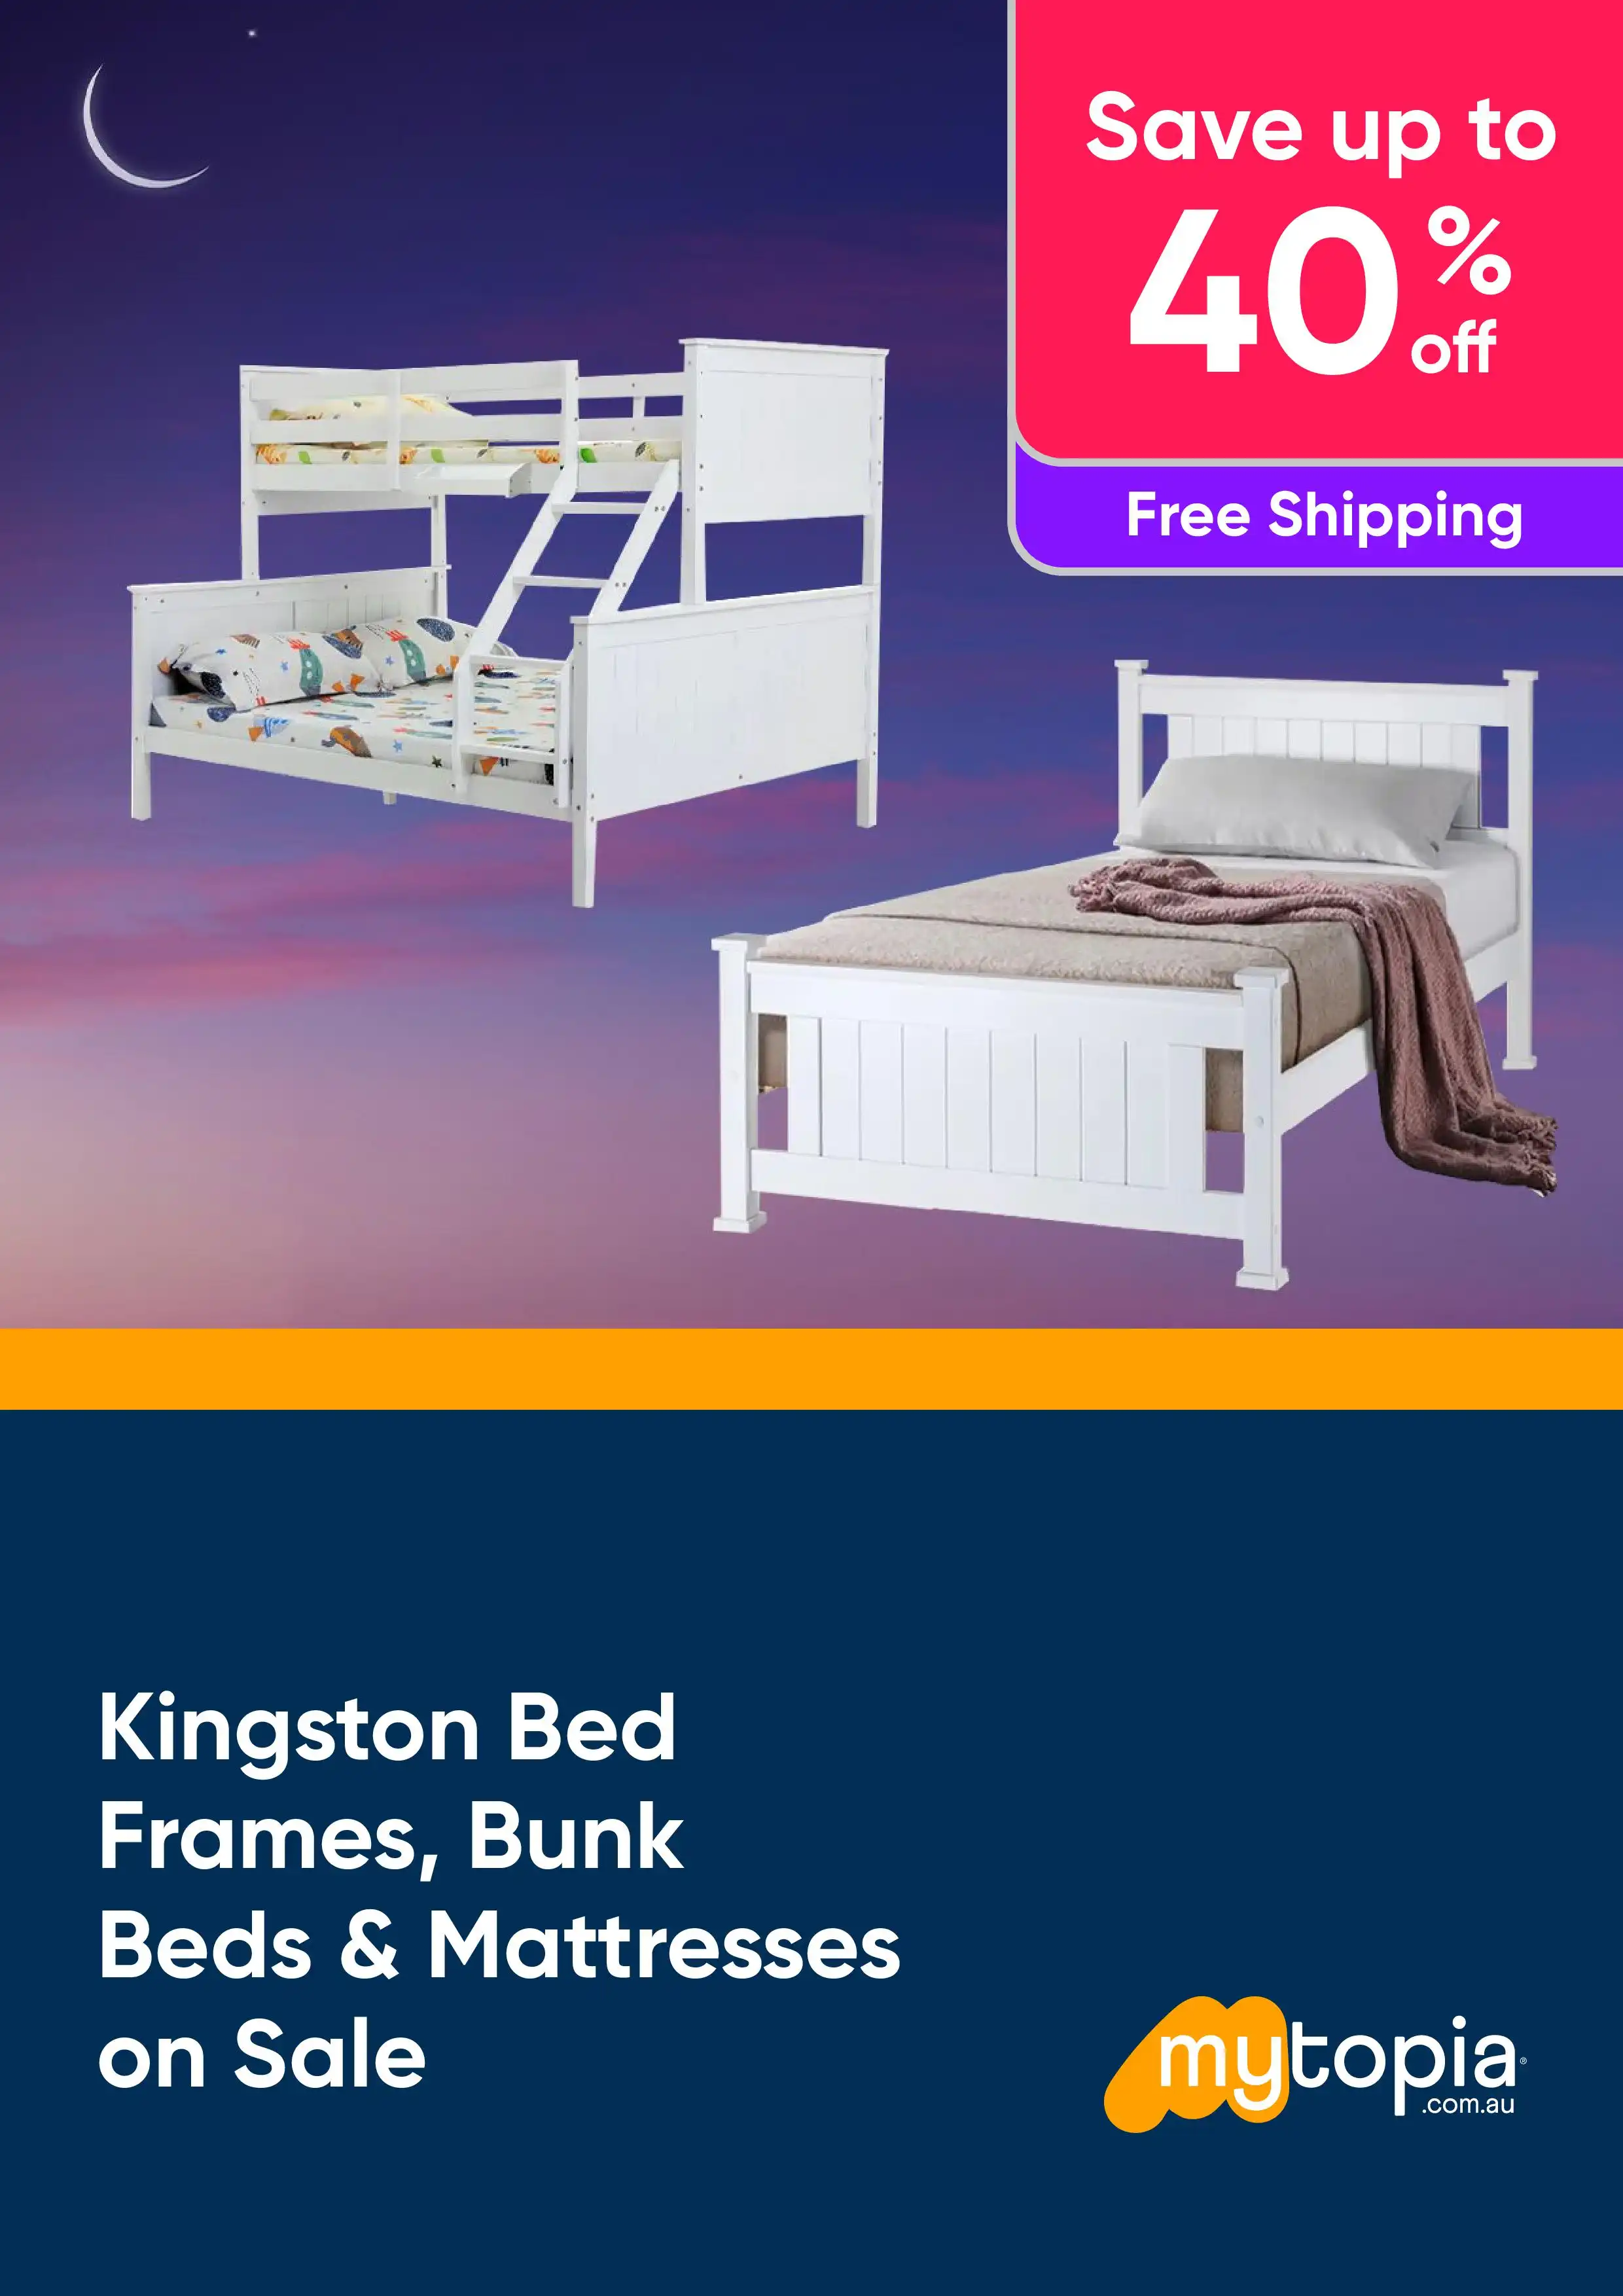 Kingston Bed Frames, Bunk Beds and Mattresses on Sale - Save Up to 40% Off